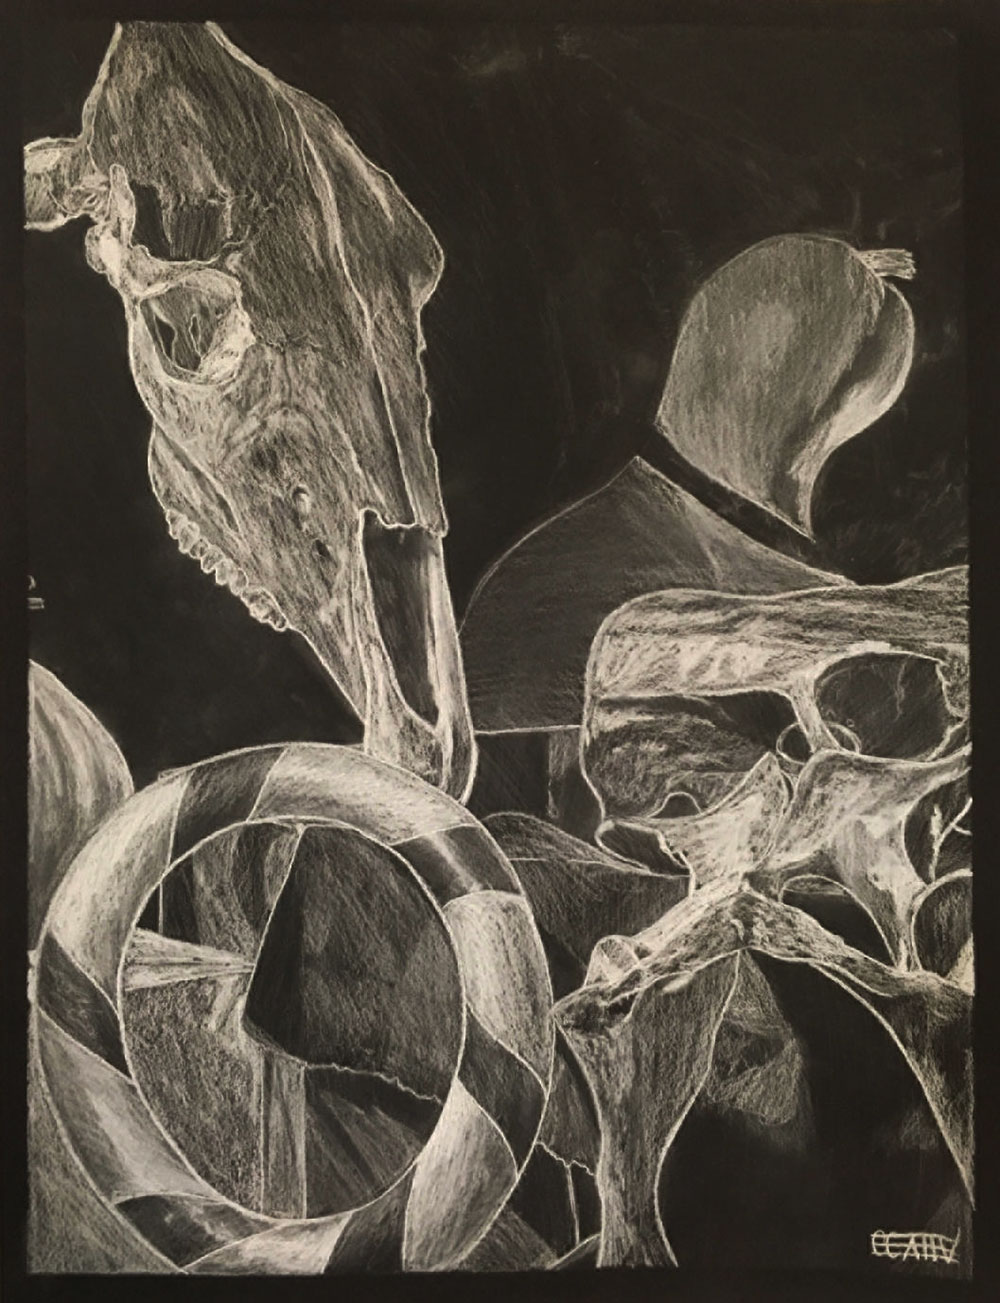 Still life drawing out of charcoal - specifically focused in on a skull, bones, and circular figure.